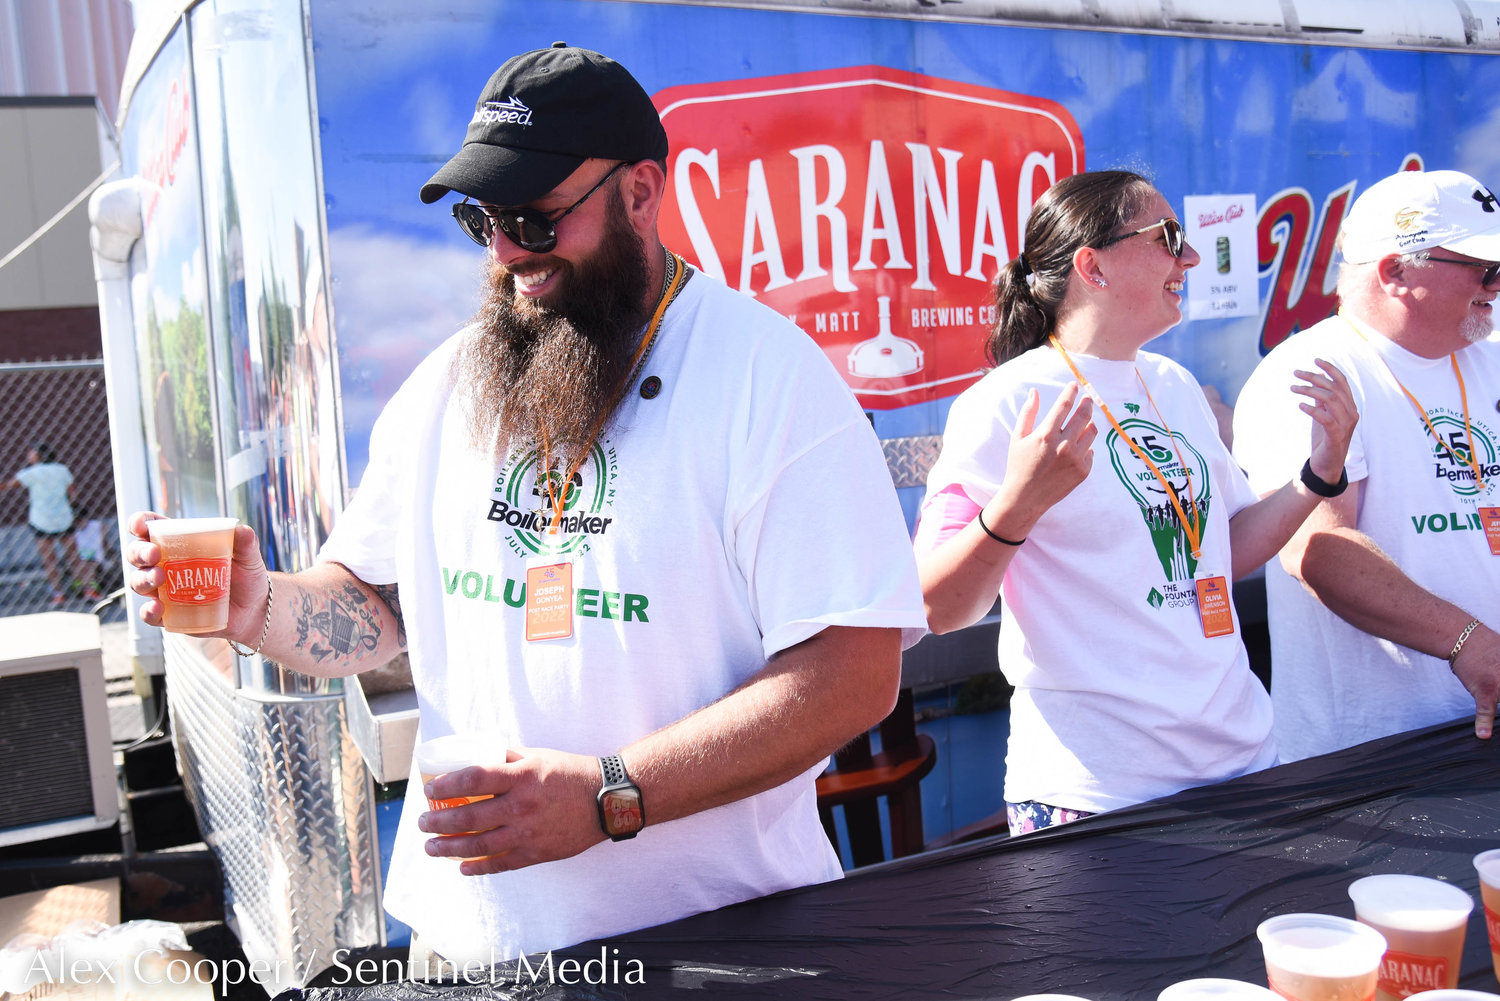 Volunteer Joseph Gonyea helps serve cold brews at the Saranac Post Race Party following the 45th Boilermaker Road Race in Utica.